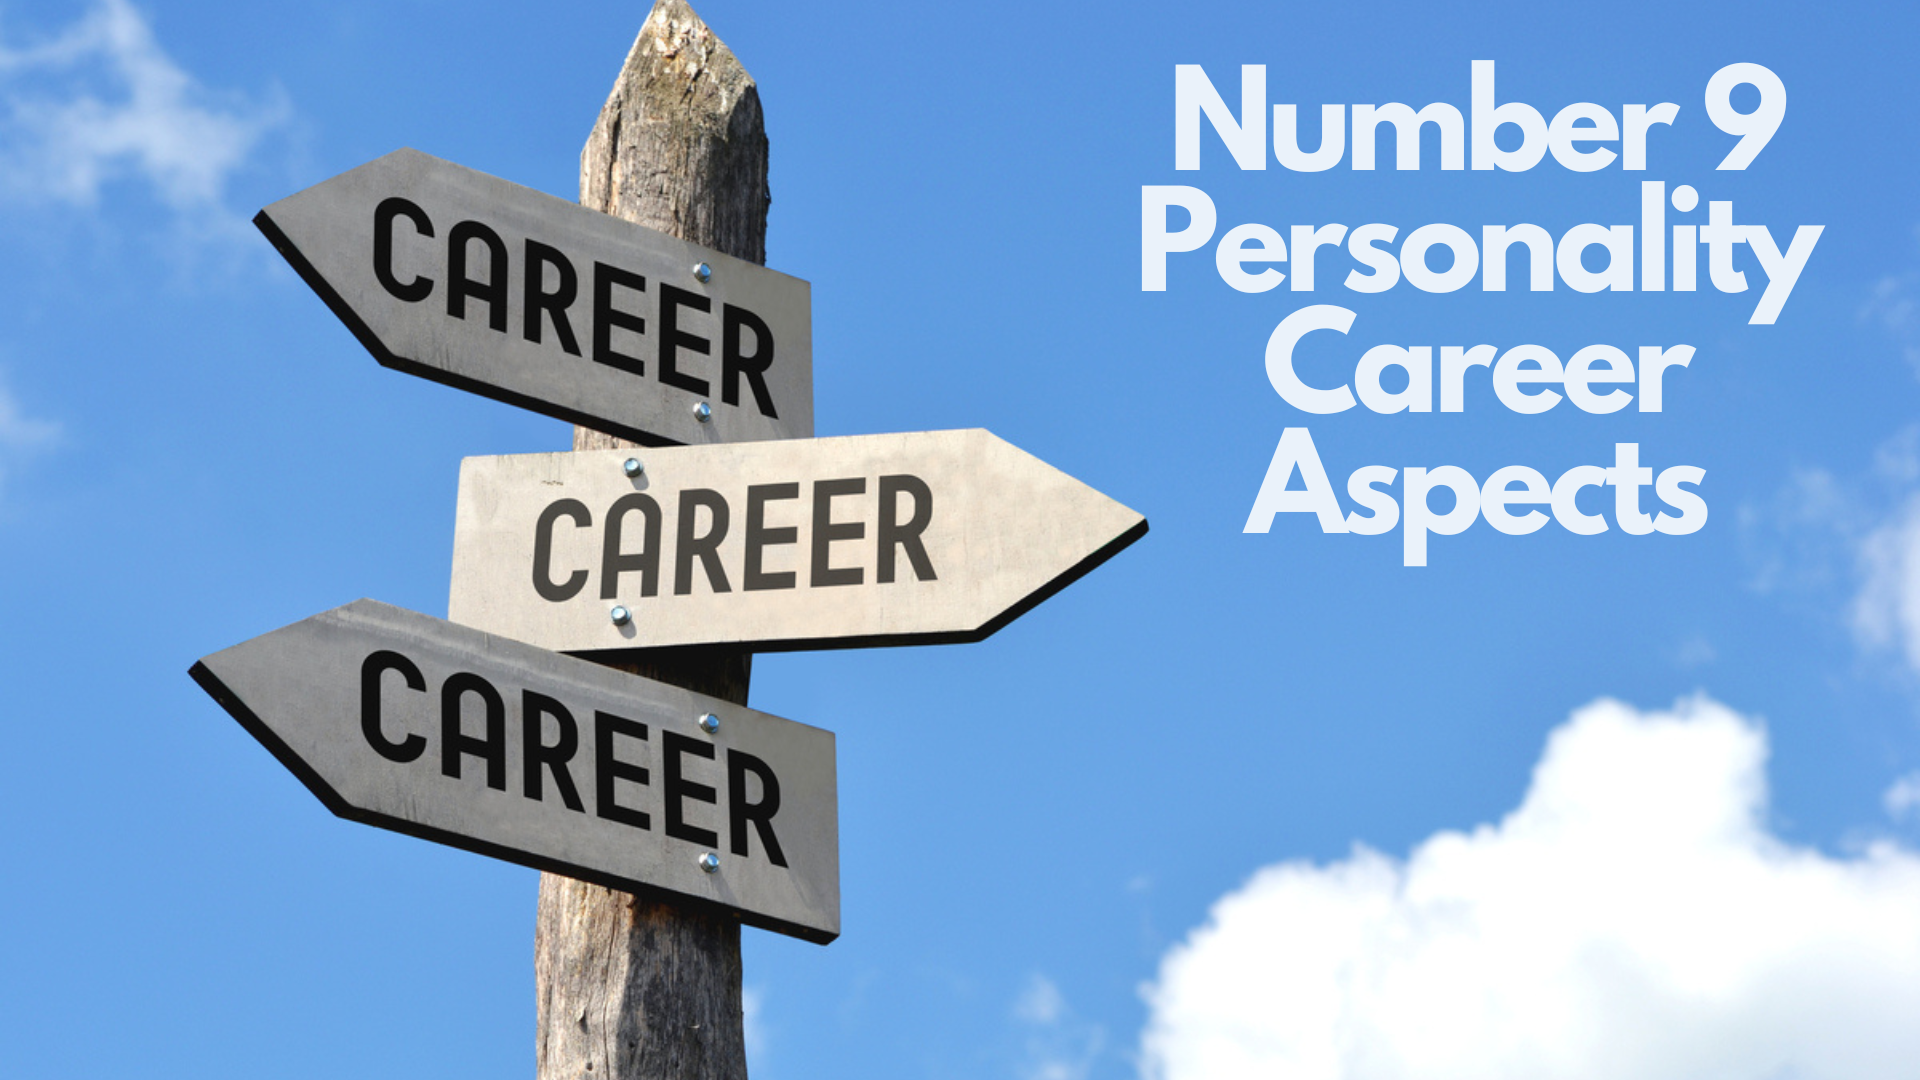 Road signage with career word written on it and words Number 9 Personality Career Aspects